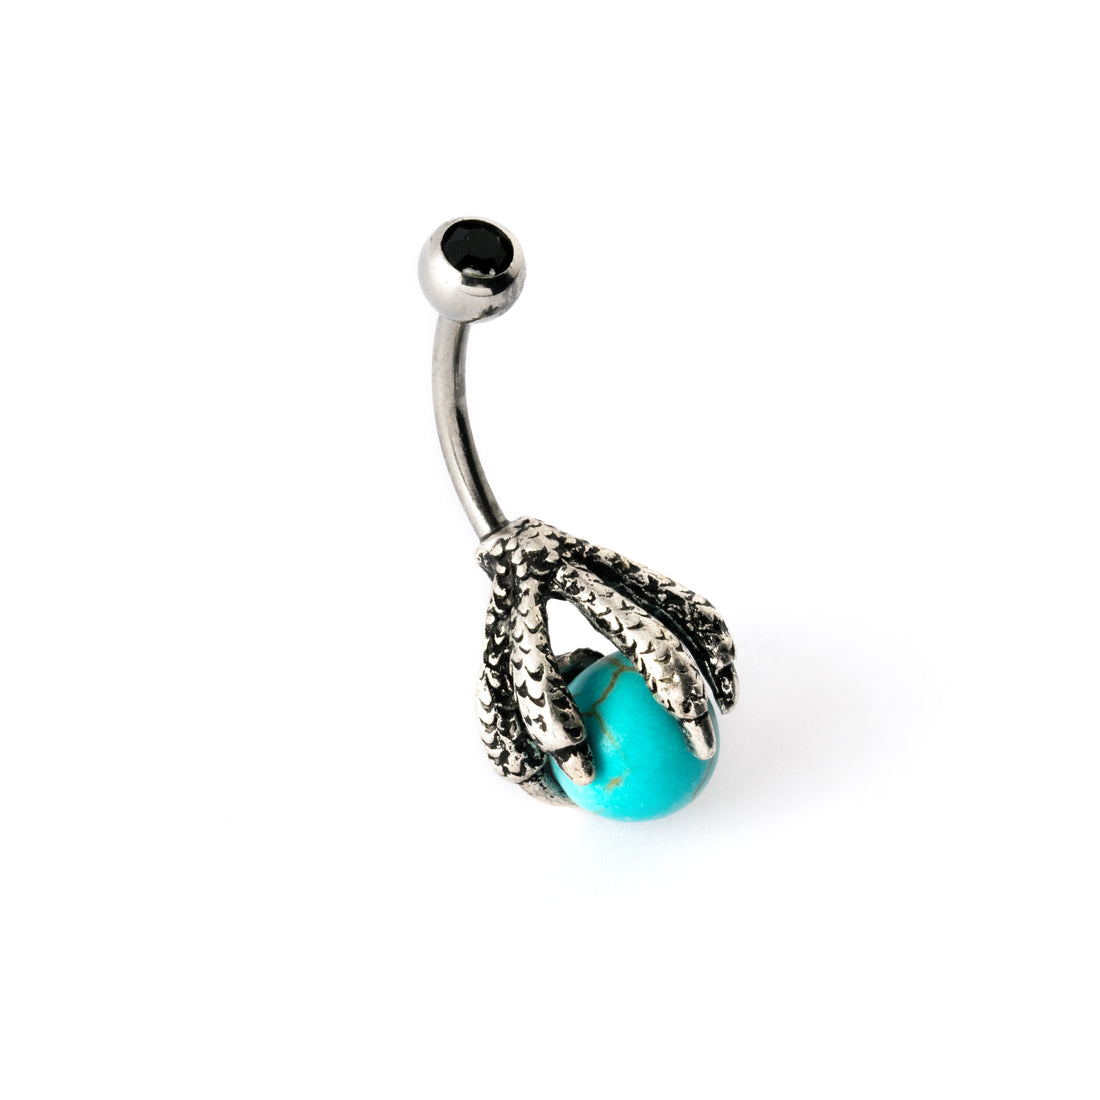 Dragon-Claw-Belly-bar-with-Turquoise1